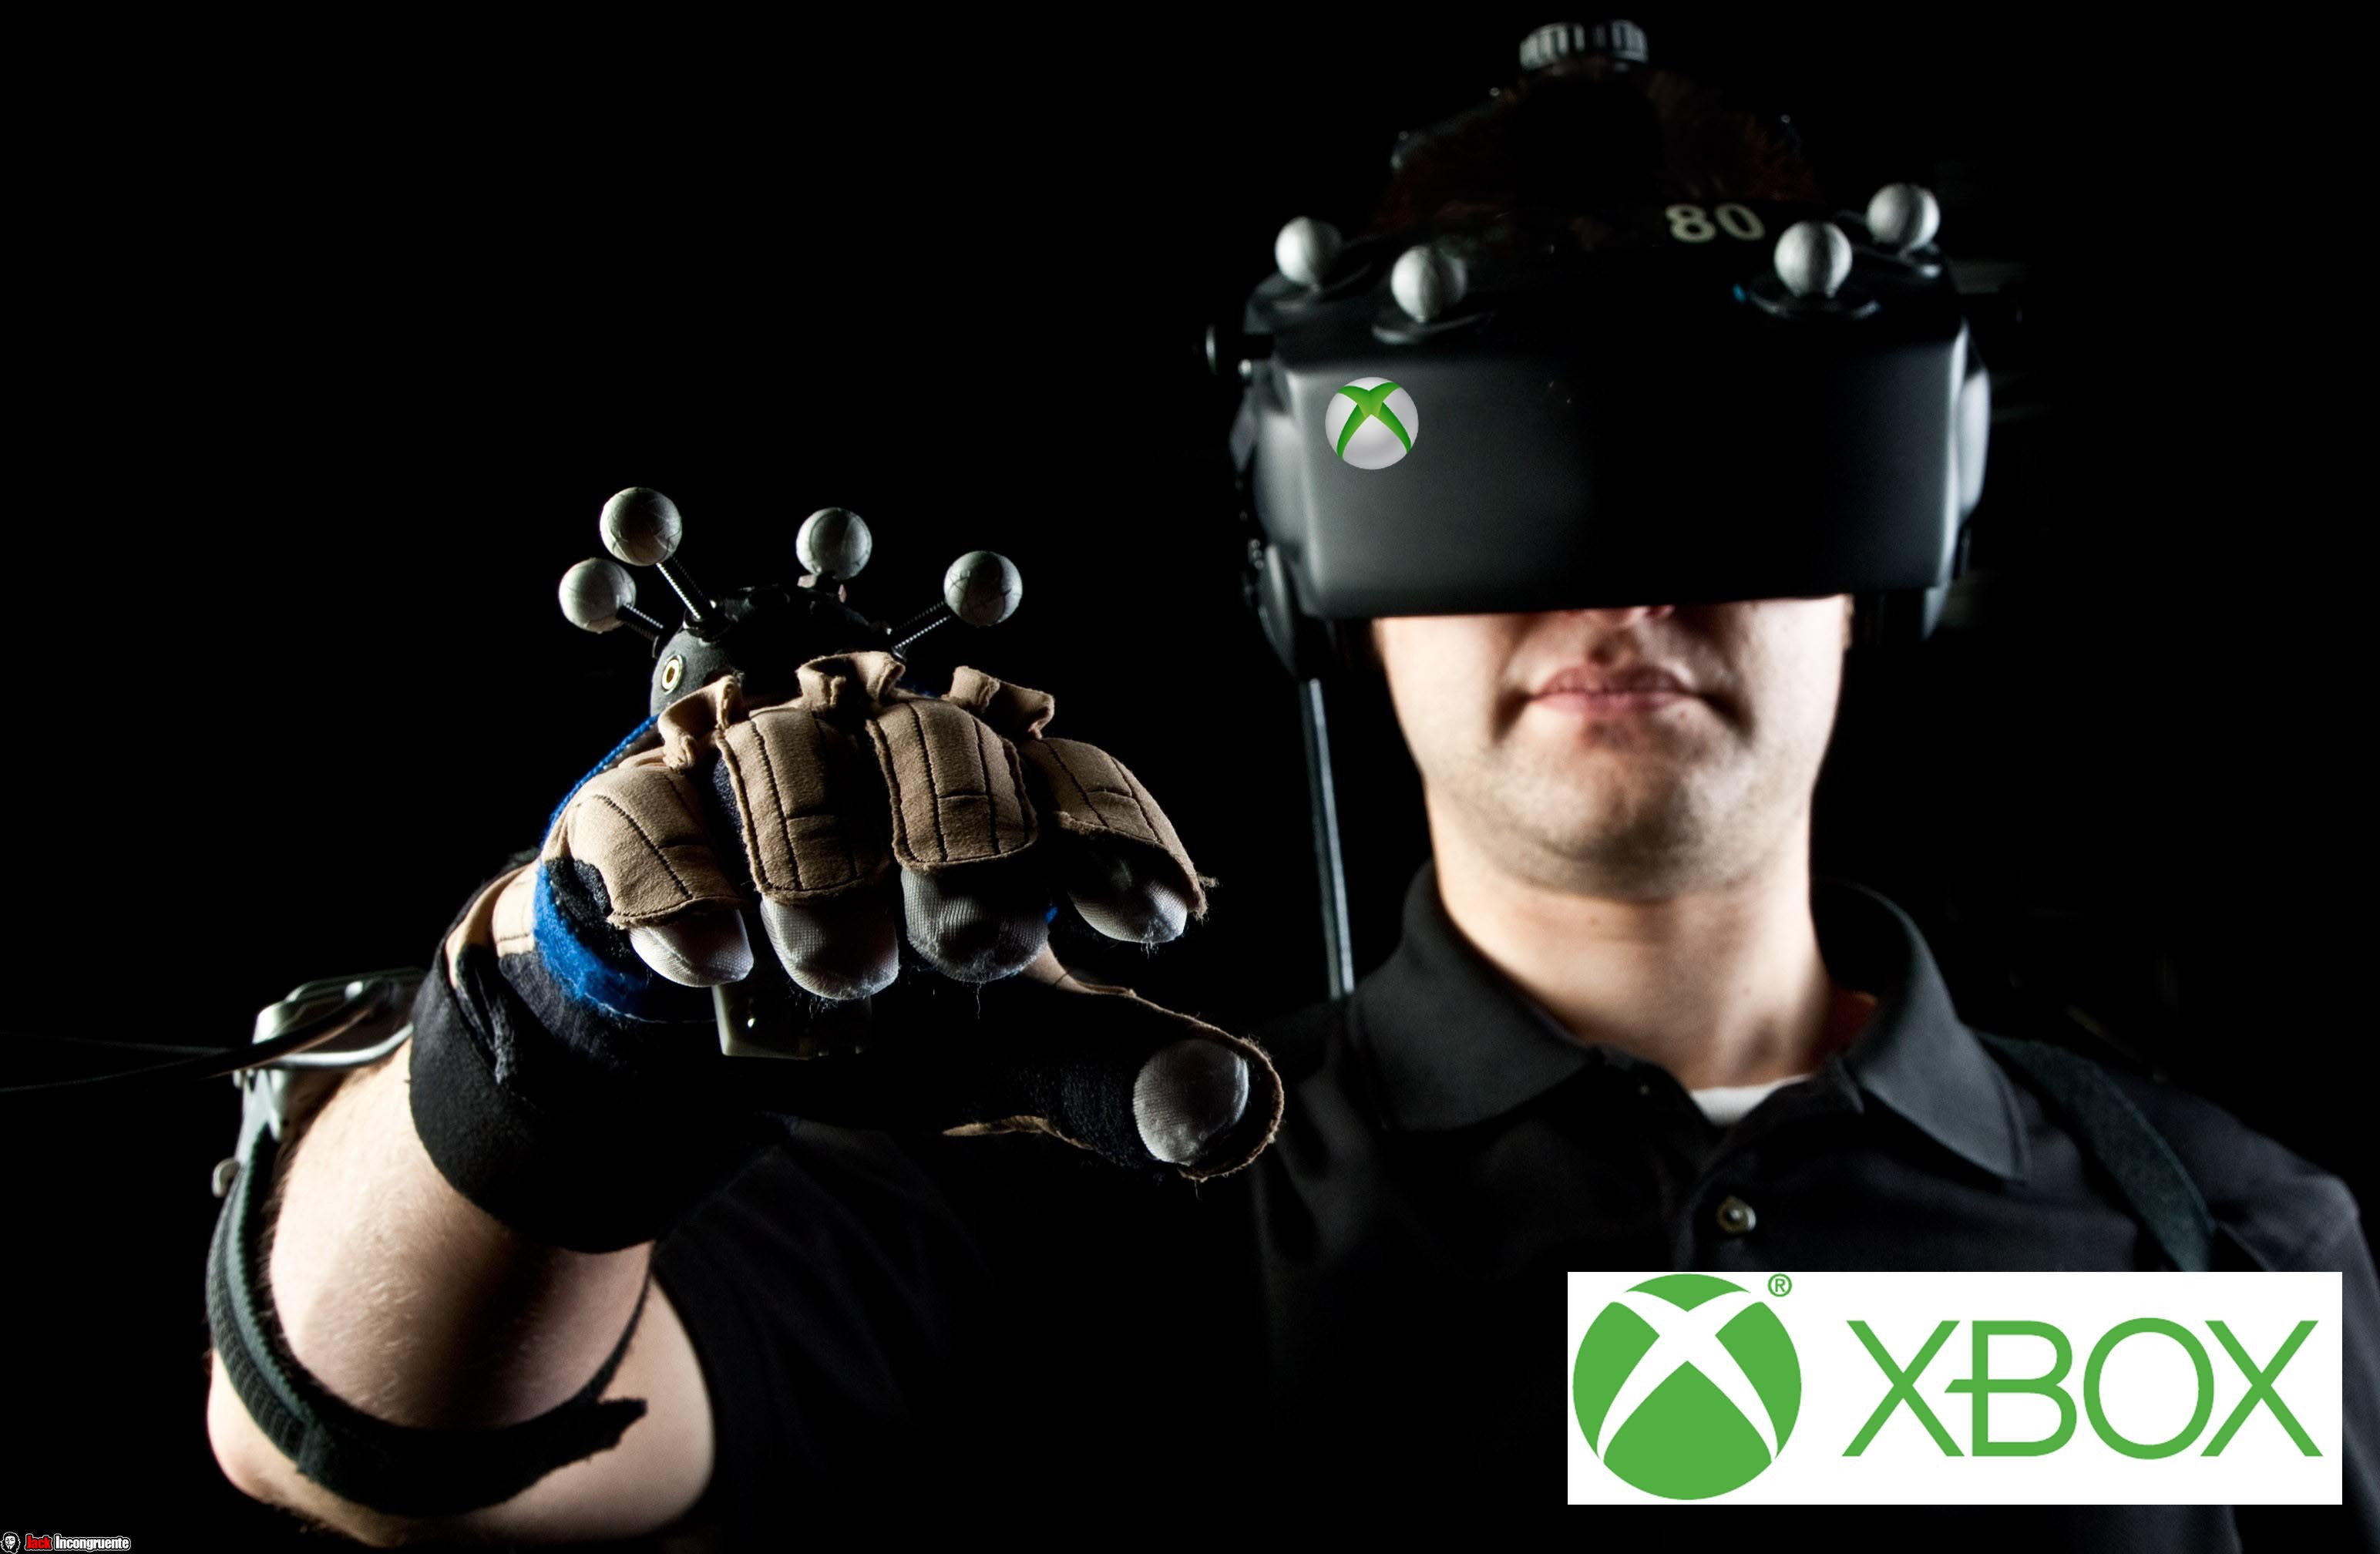 Xbox and virtual reality: would the company have to make an effort to exploit that potential?